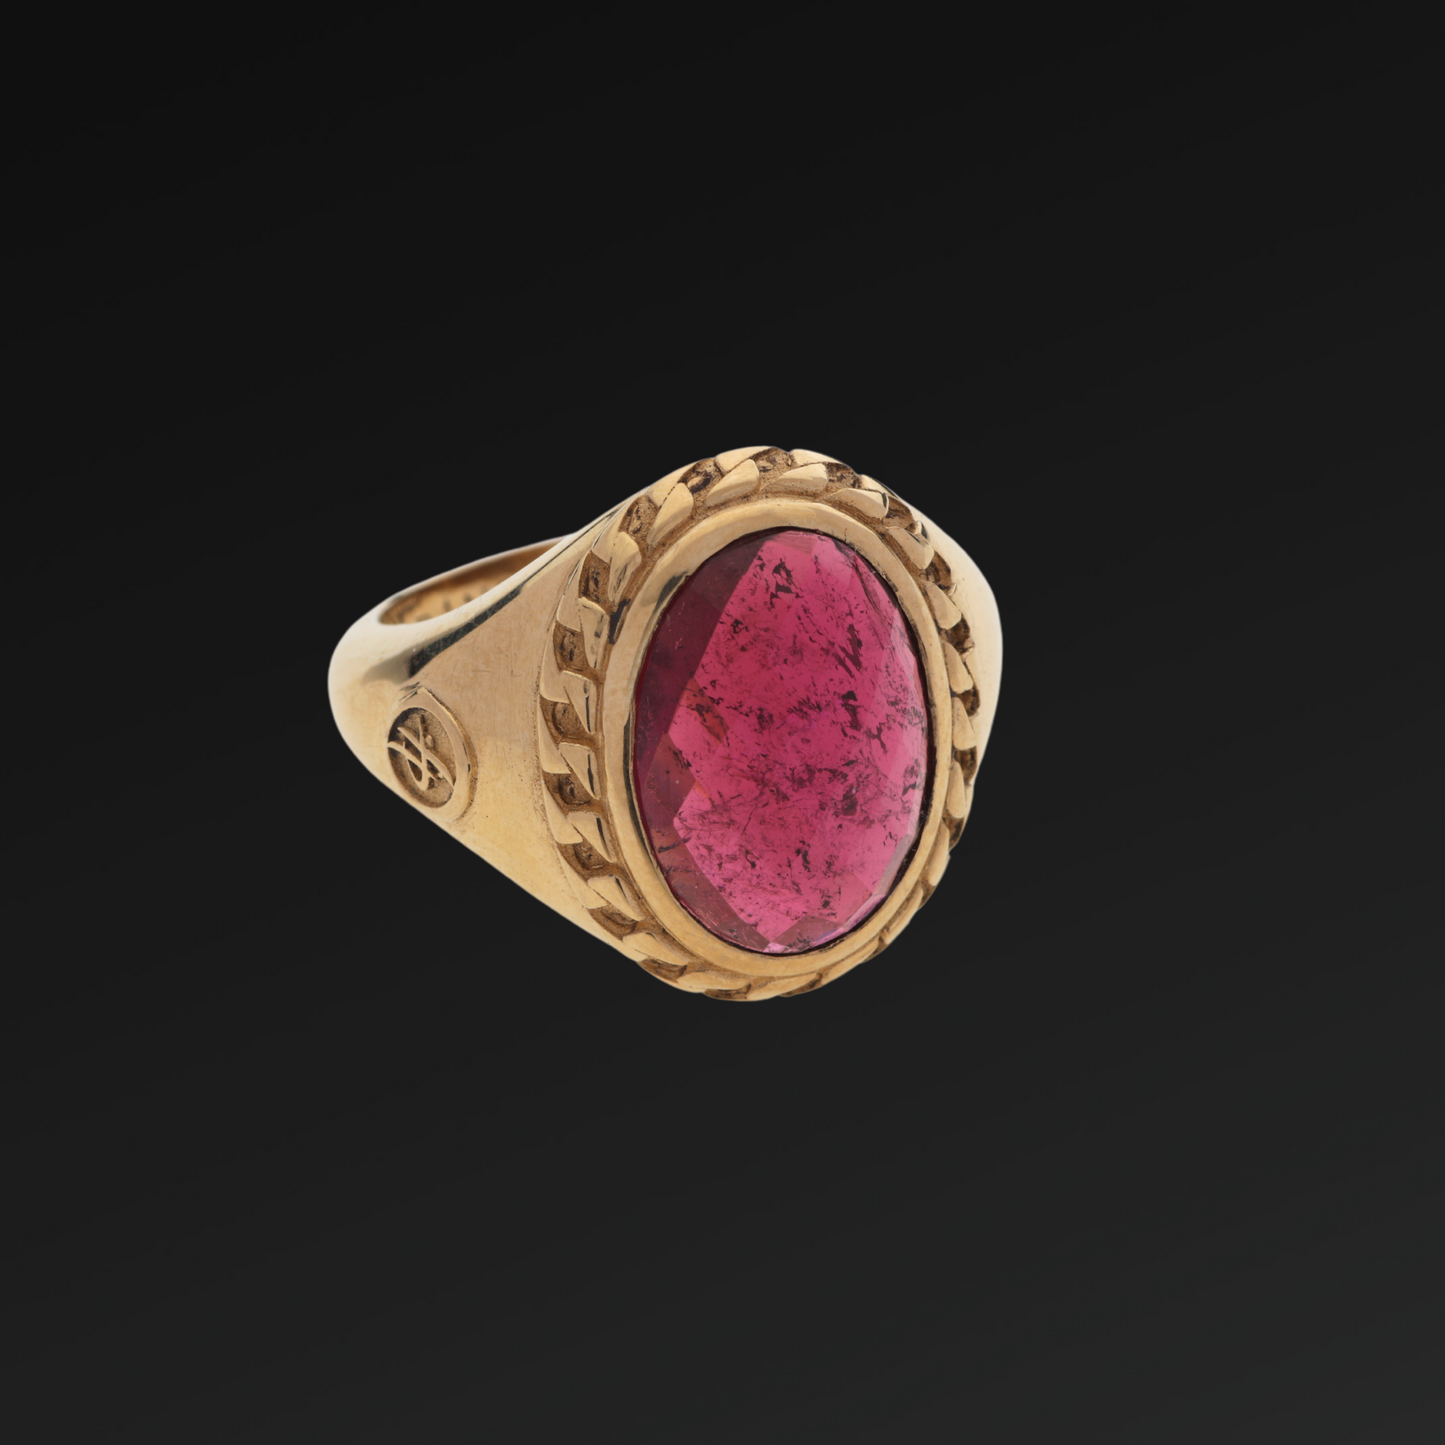 Small Sincerity Ring in Gold and Rubellite